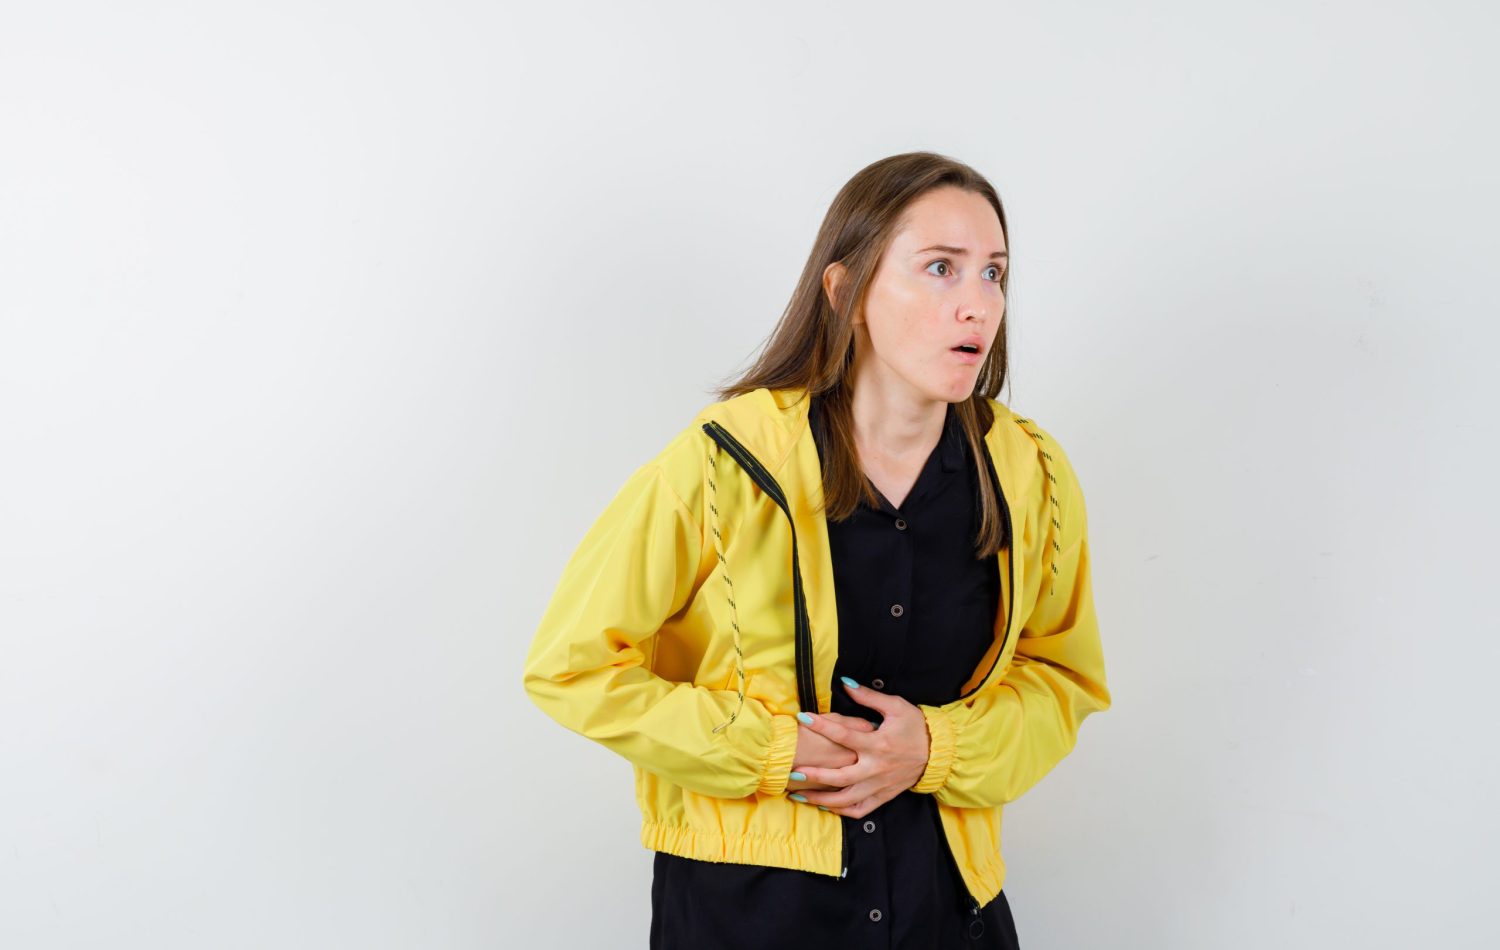 young girl in black blouse, yellow jacket having bellyache and looking exhausted , front view.